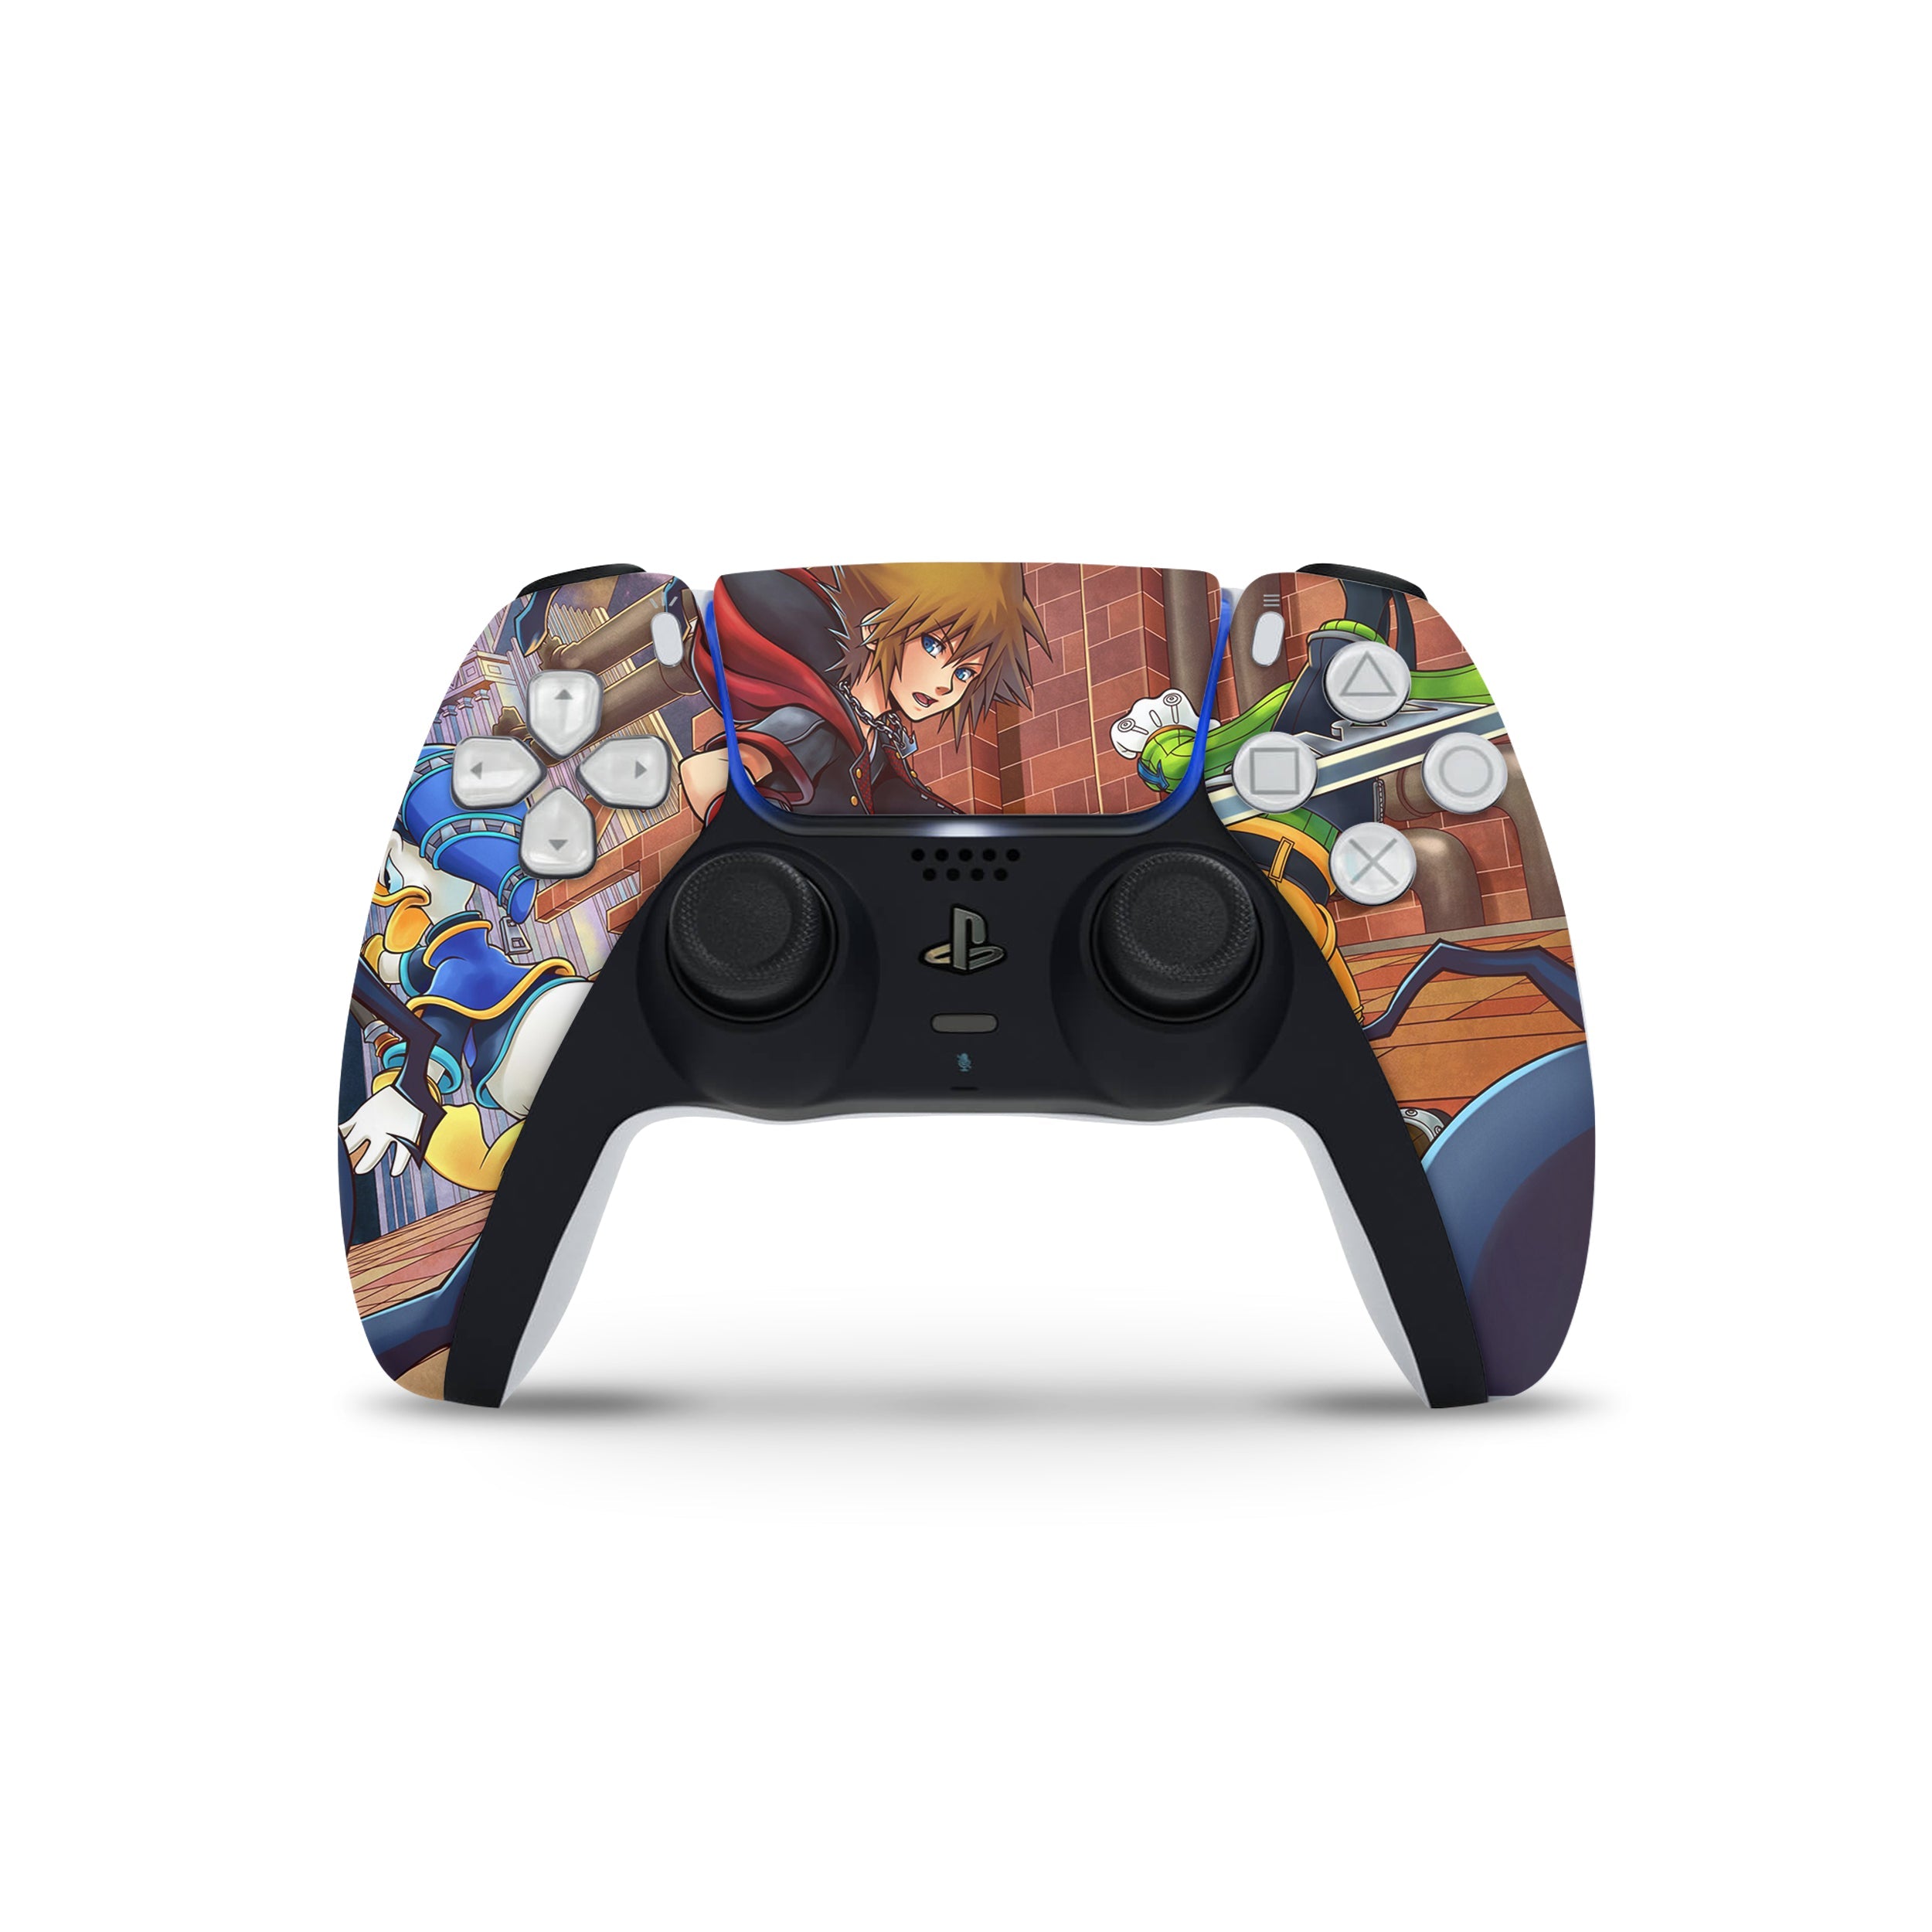 A video game skin featuring a Kingdom Hearts design for the PS5 DualSense Controller.